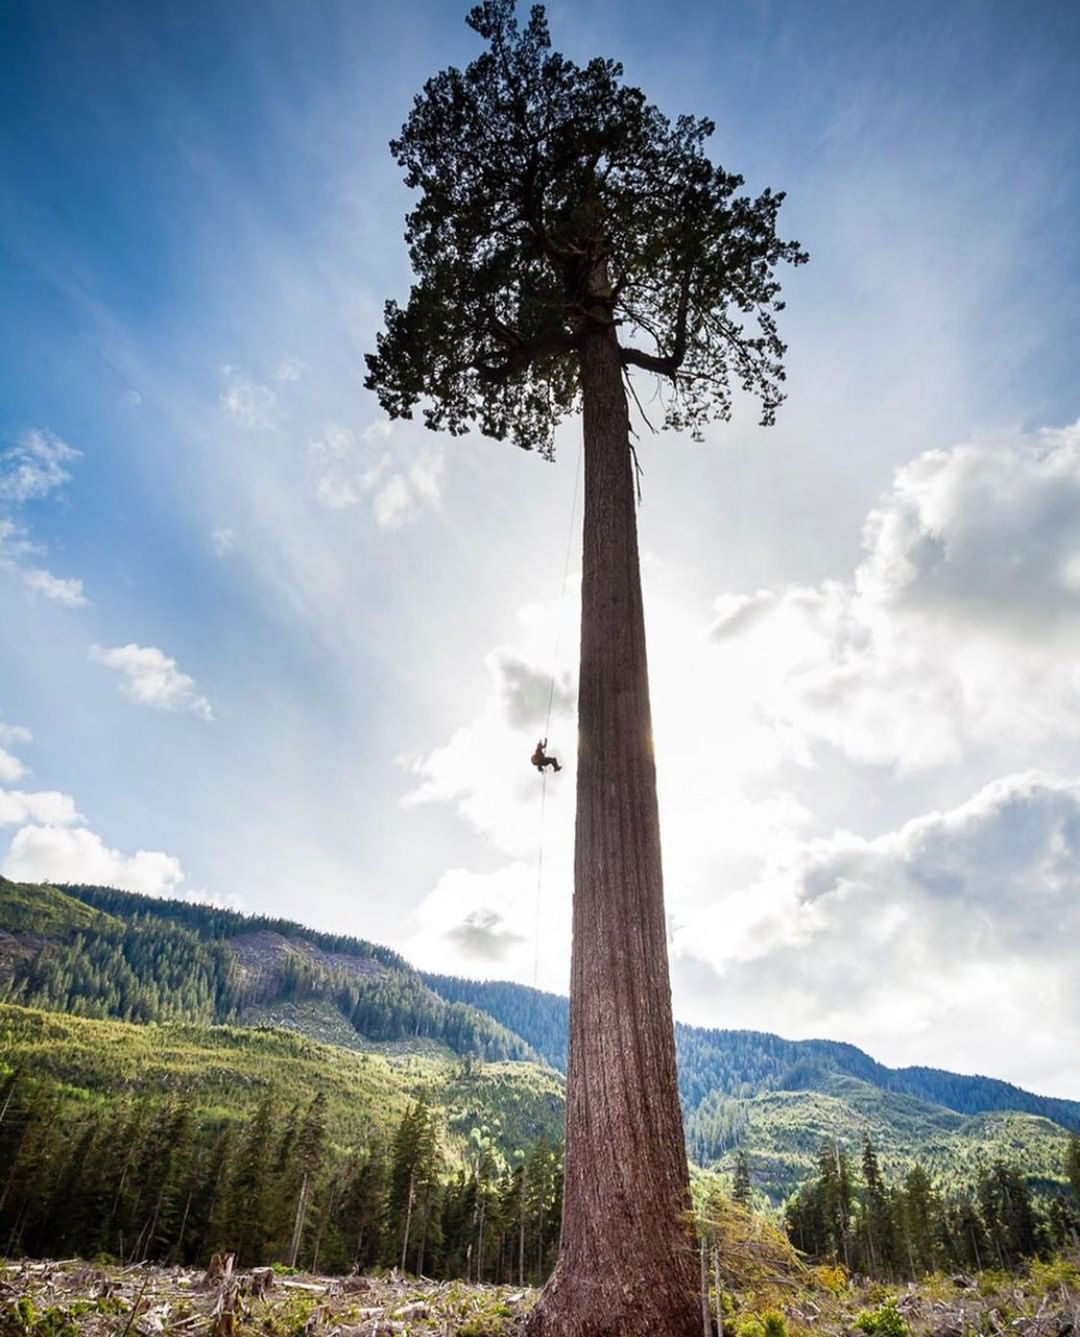 A huge tree with red brown trunk and a green dome of leaves stands tall in the foreground in front of bright blue skies and a forested mountain. One person is seen swinging from a rope in the tree half way up, looking very small compared to the tall trunk.